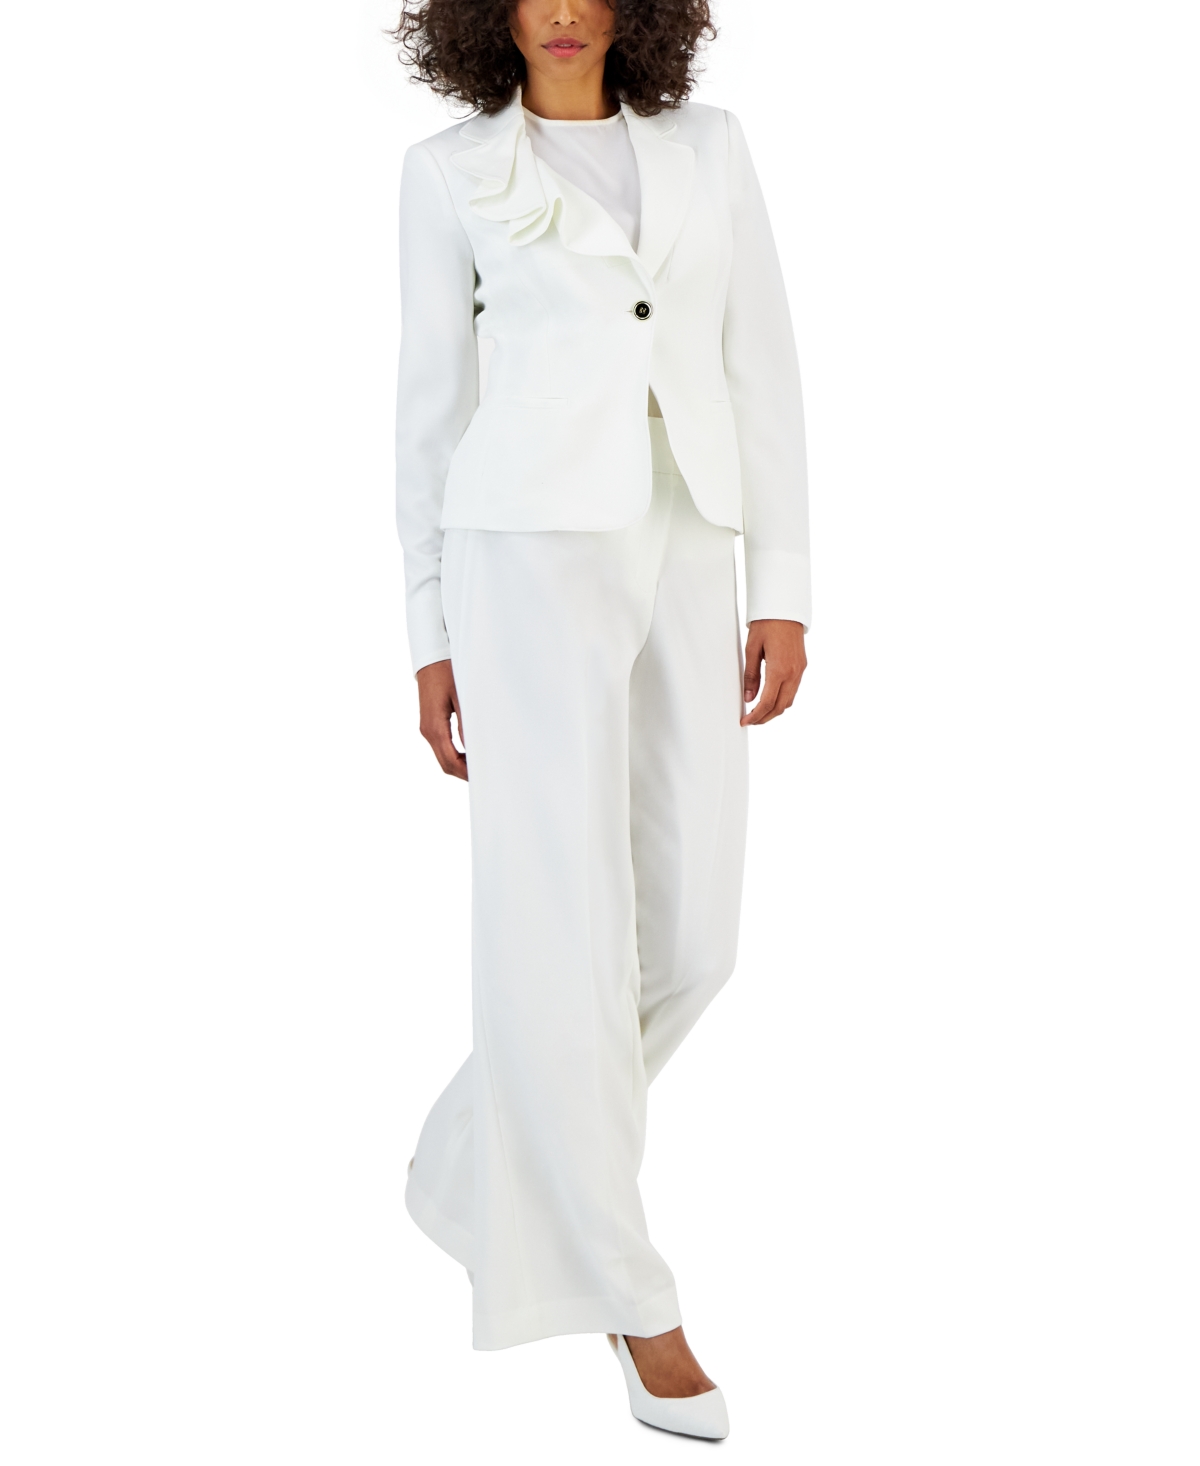 Nipon Boutique Women's Asymmetrical Ruffled One-button Jacket & Wide-leg Pant Suit In Vanilla Ice